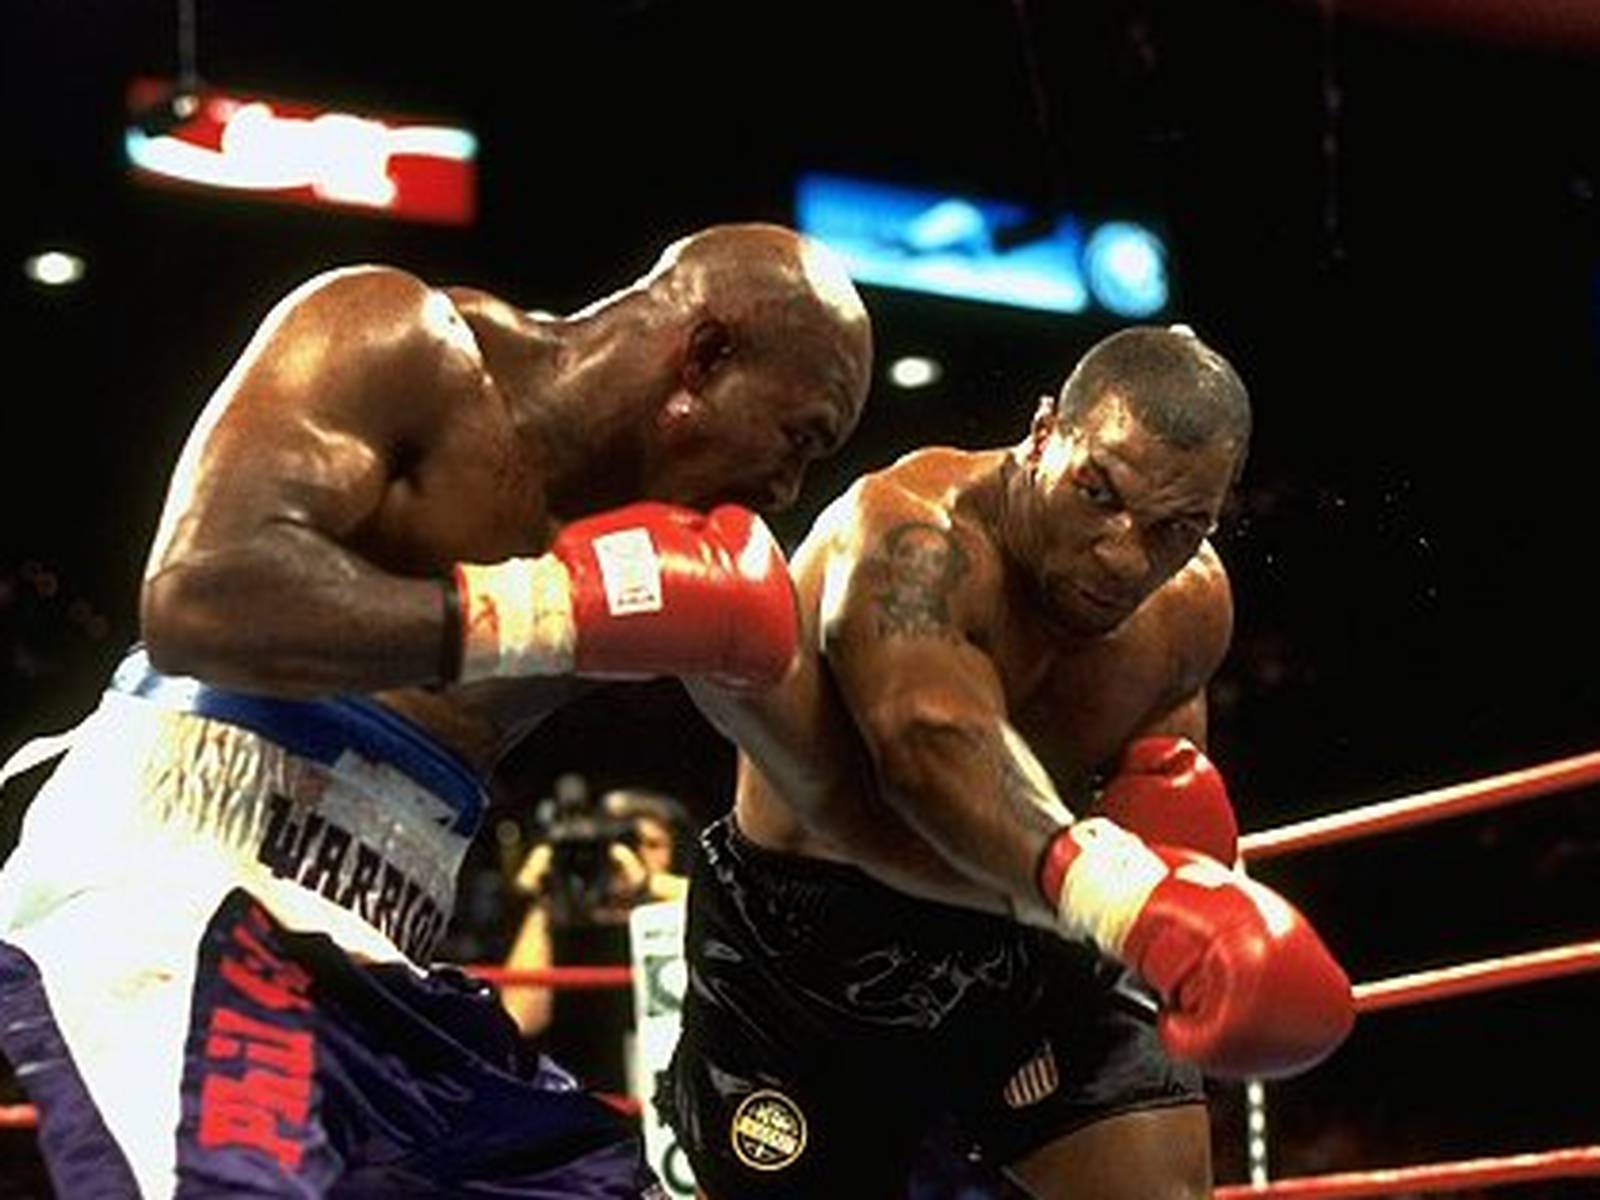 The Bite Fight: Tyson, Holyfield and the Night That Changed Boxing